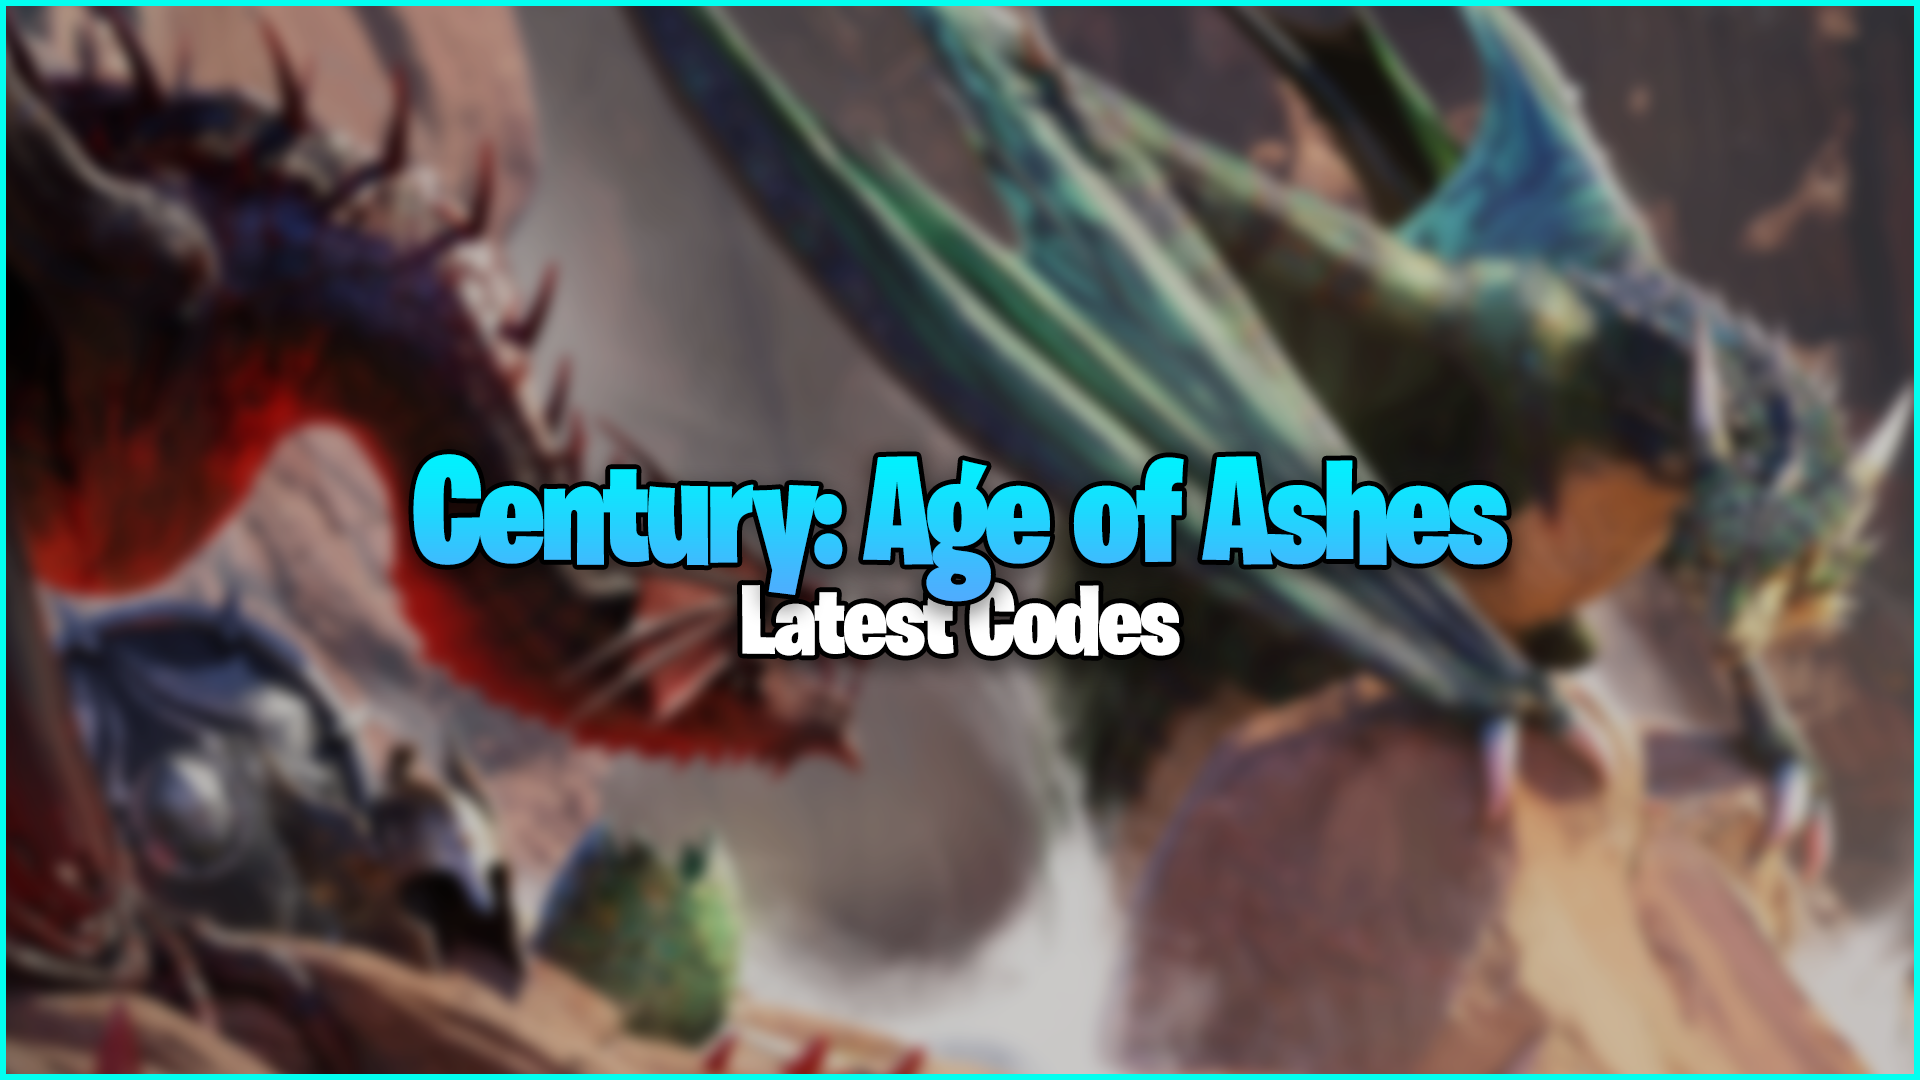 century: age of ashes codes 2022